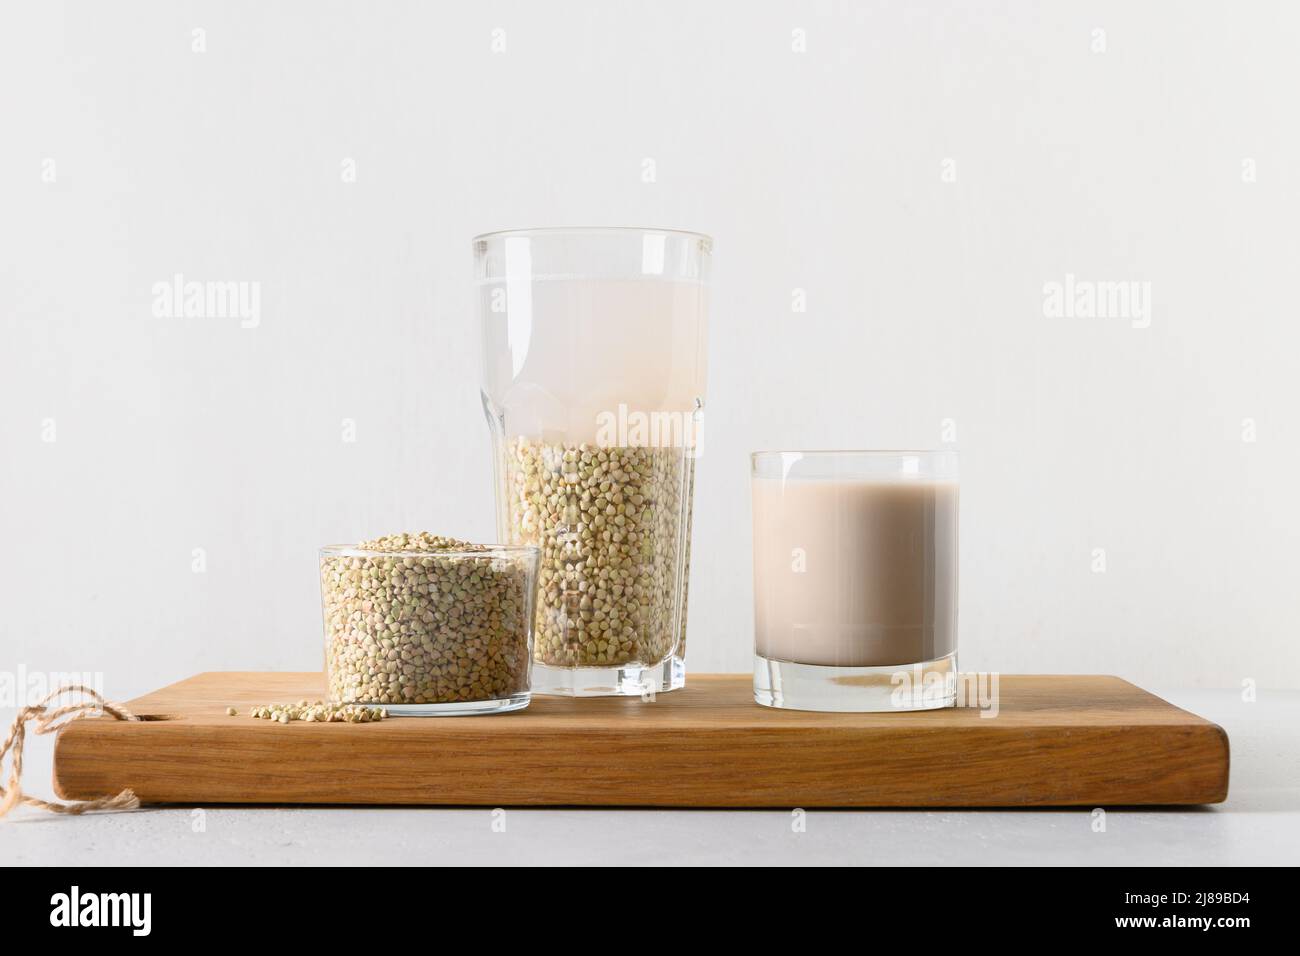 Cooking vegan cereal green buckwheat milk on white background. Healthy plant based milk replacer and lactose free. Stock Photo